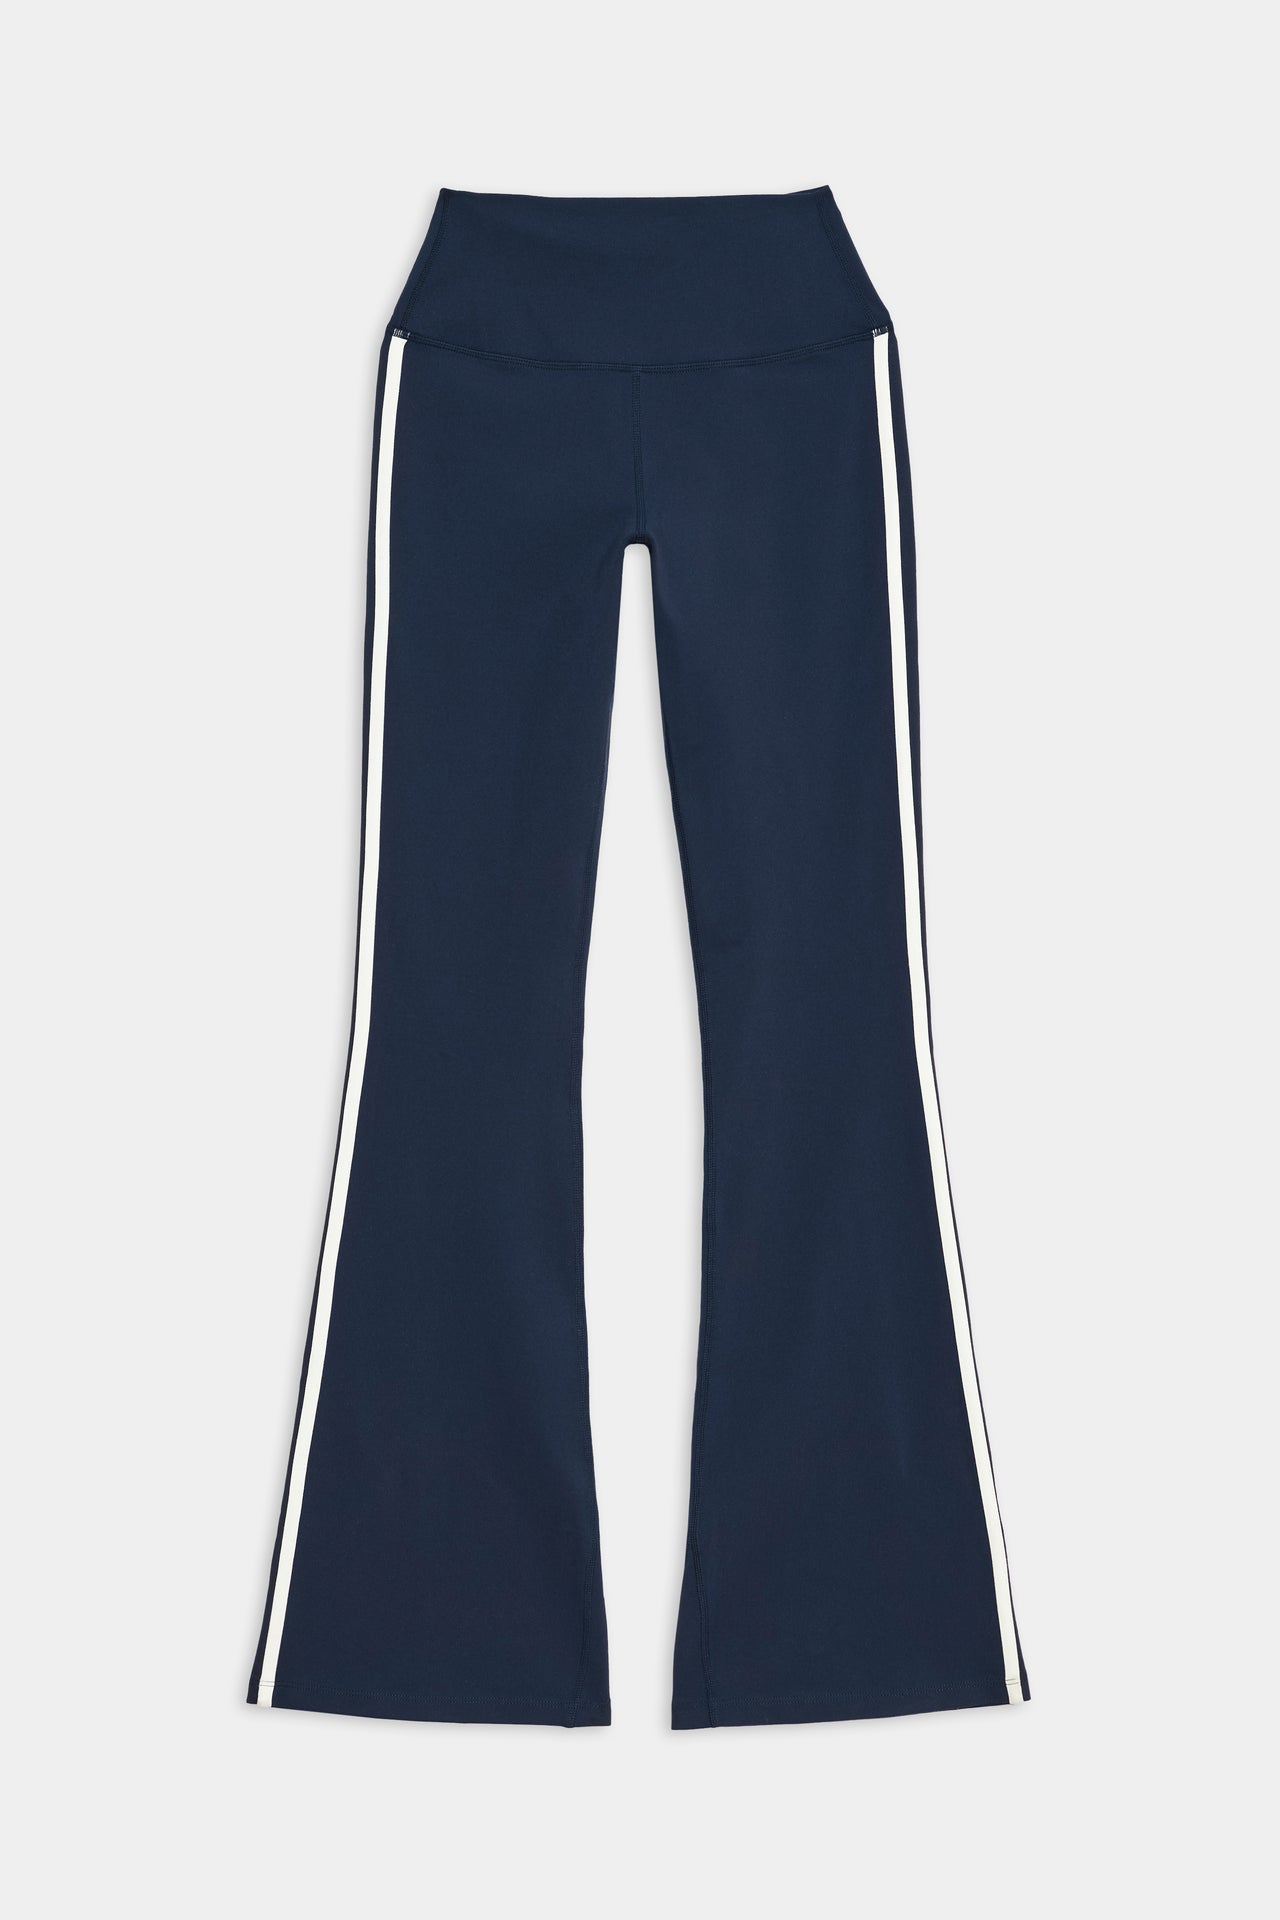 Front side view of dark blue high waist below ankle length legging with wide flared bottoms and white double side stripes on both legs and white and side black stripes on both legs